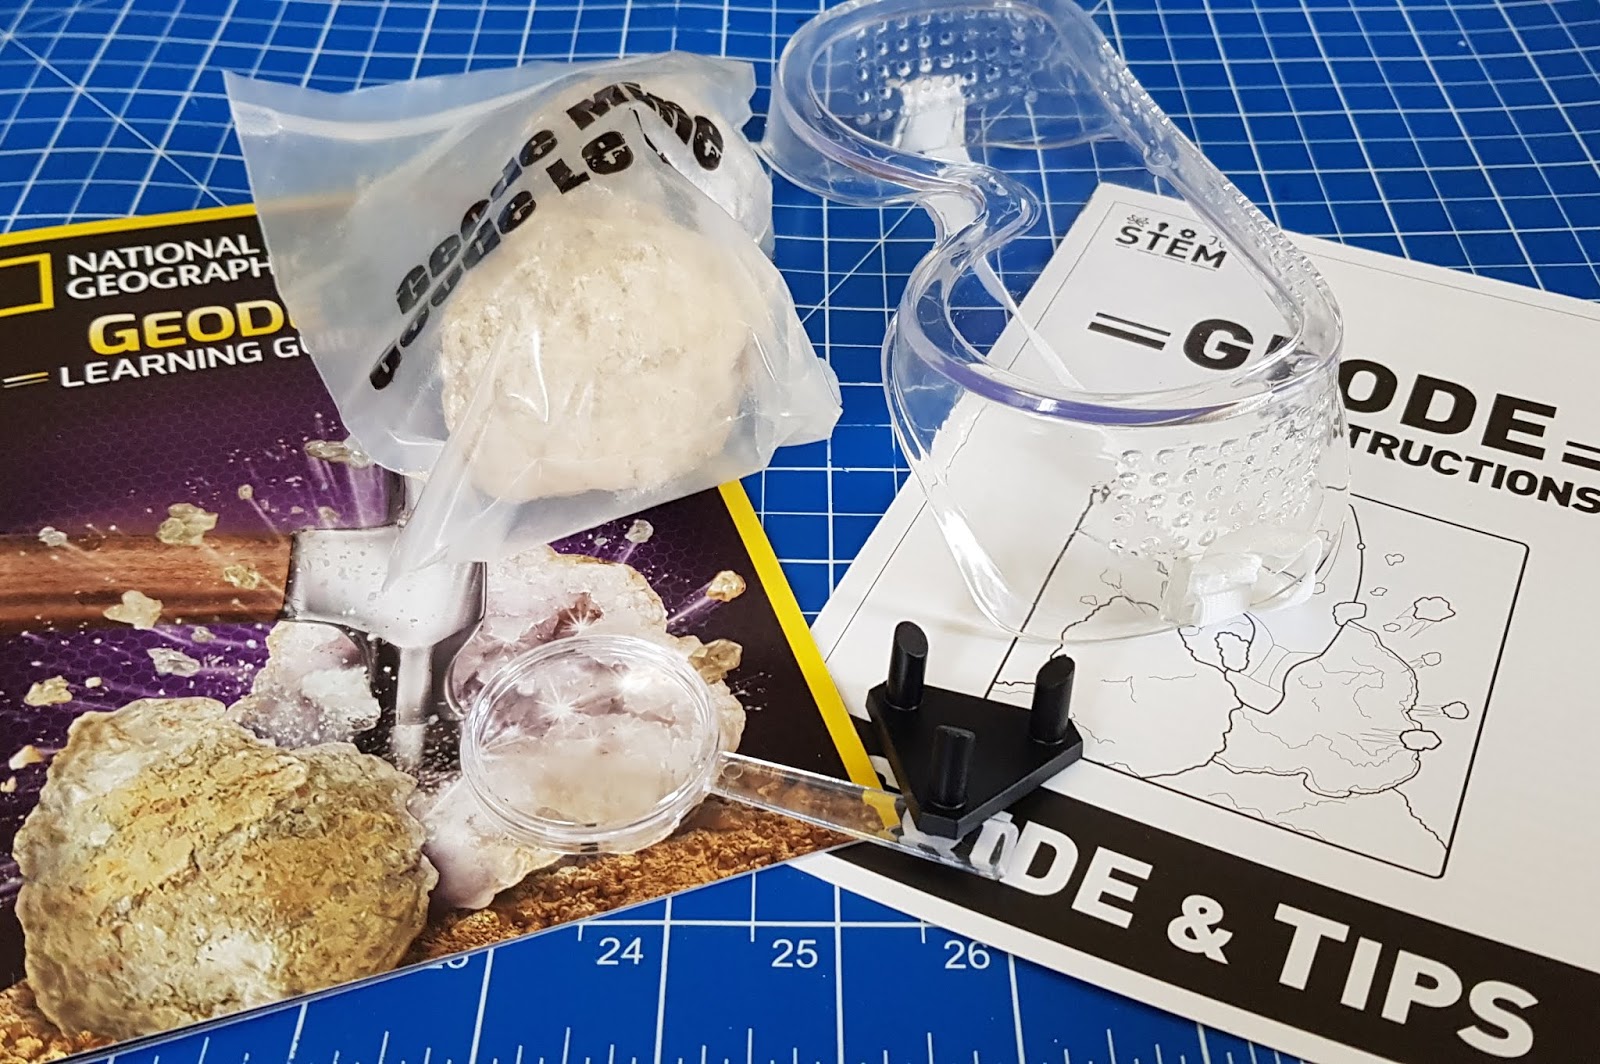 The Brick Castle: National Geographic Break Open Geodes Set Review 